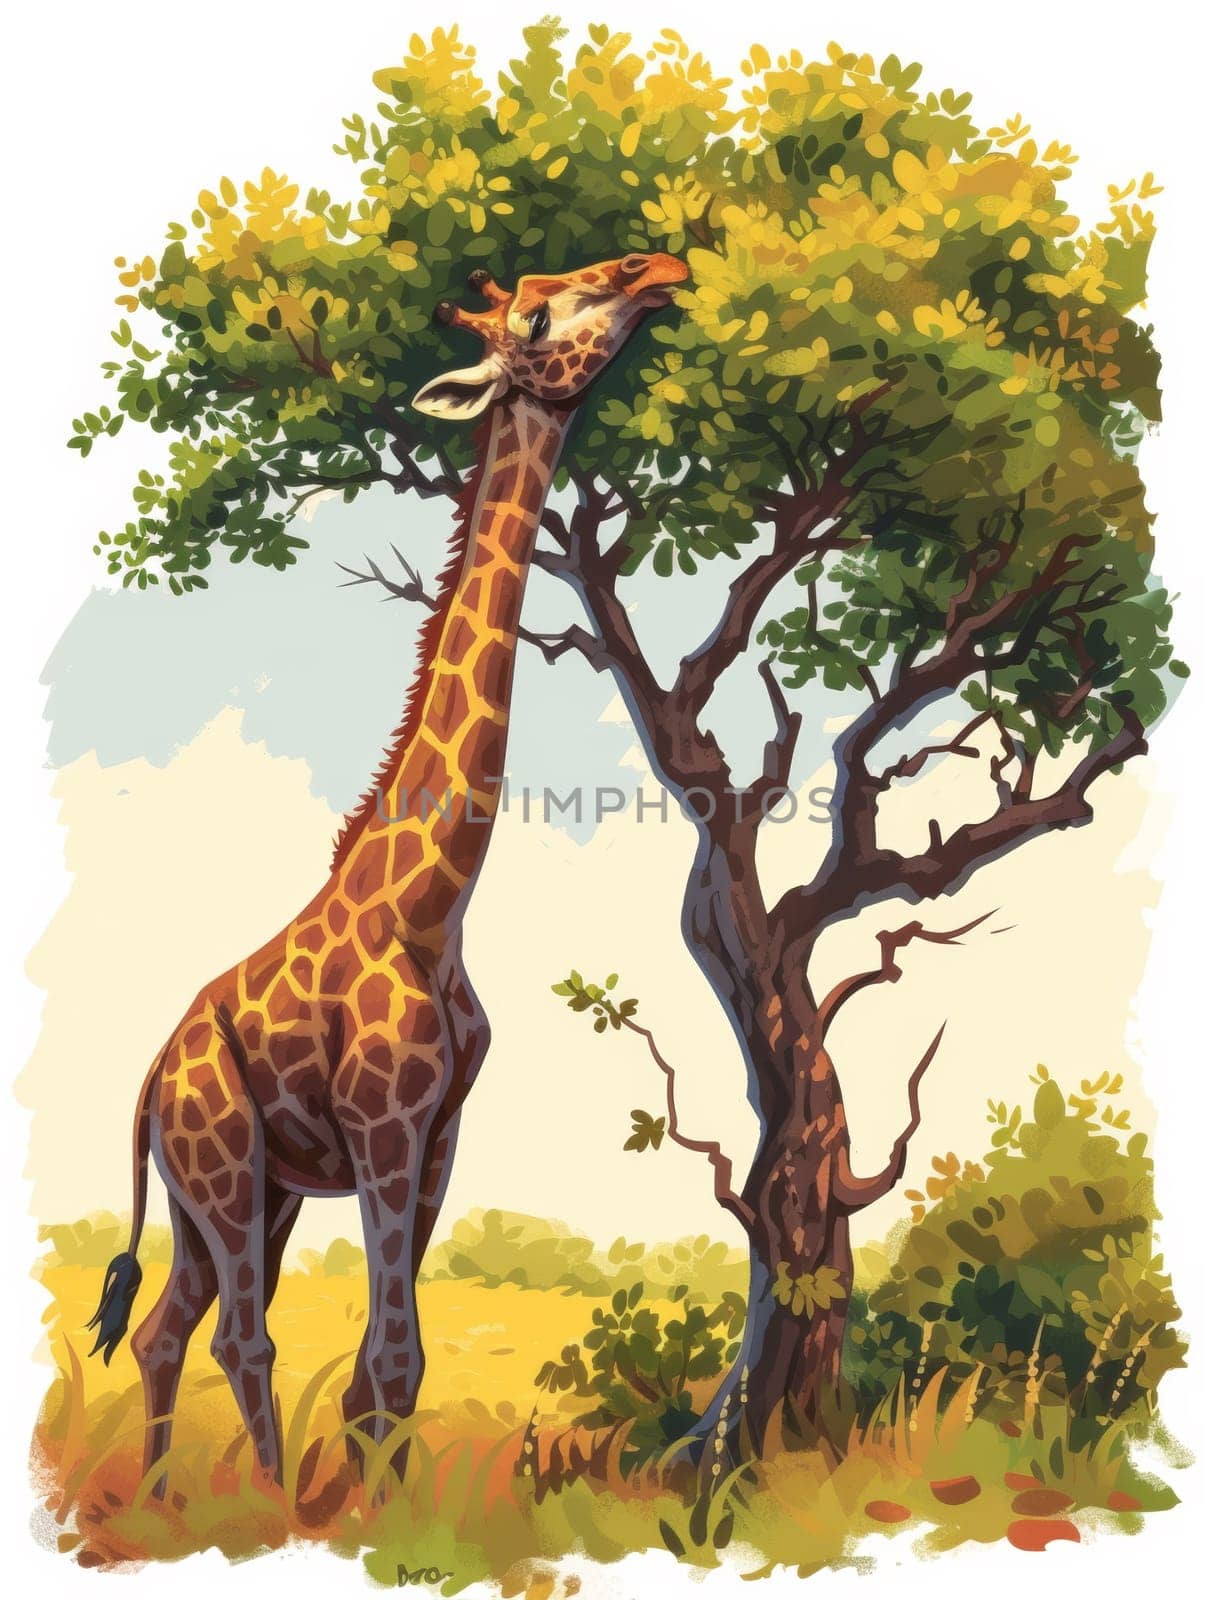 A giraffe reaching up to eat leaves from a tree